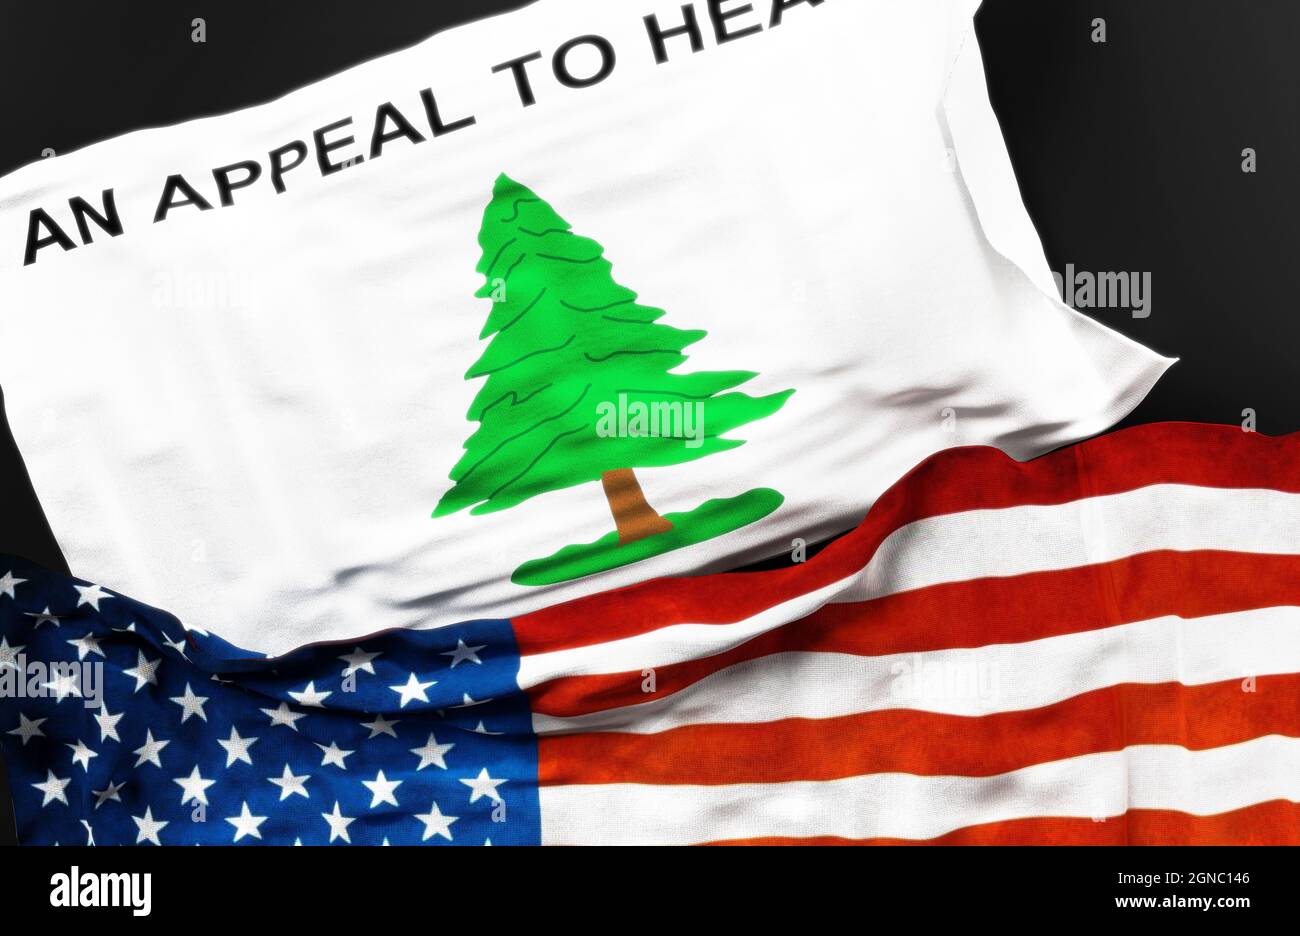 Flag of Pine Tree An Appeal to Heaven along with a flag of the United States of America as a symbol of unity between them, 3d illustration Stock Photo